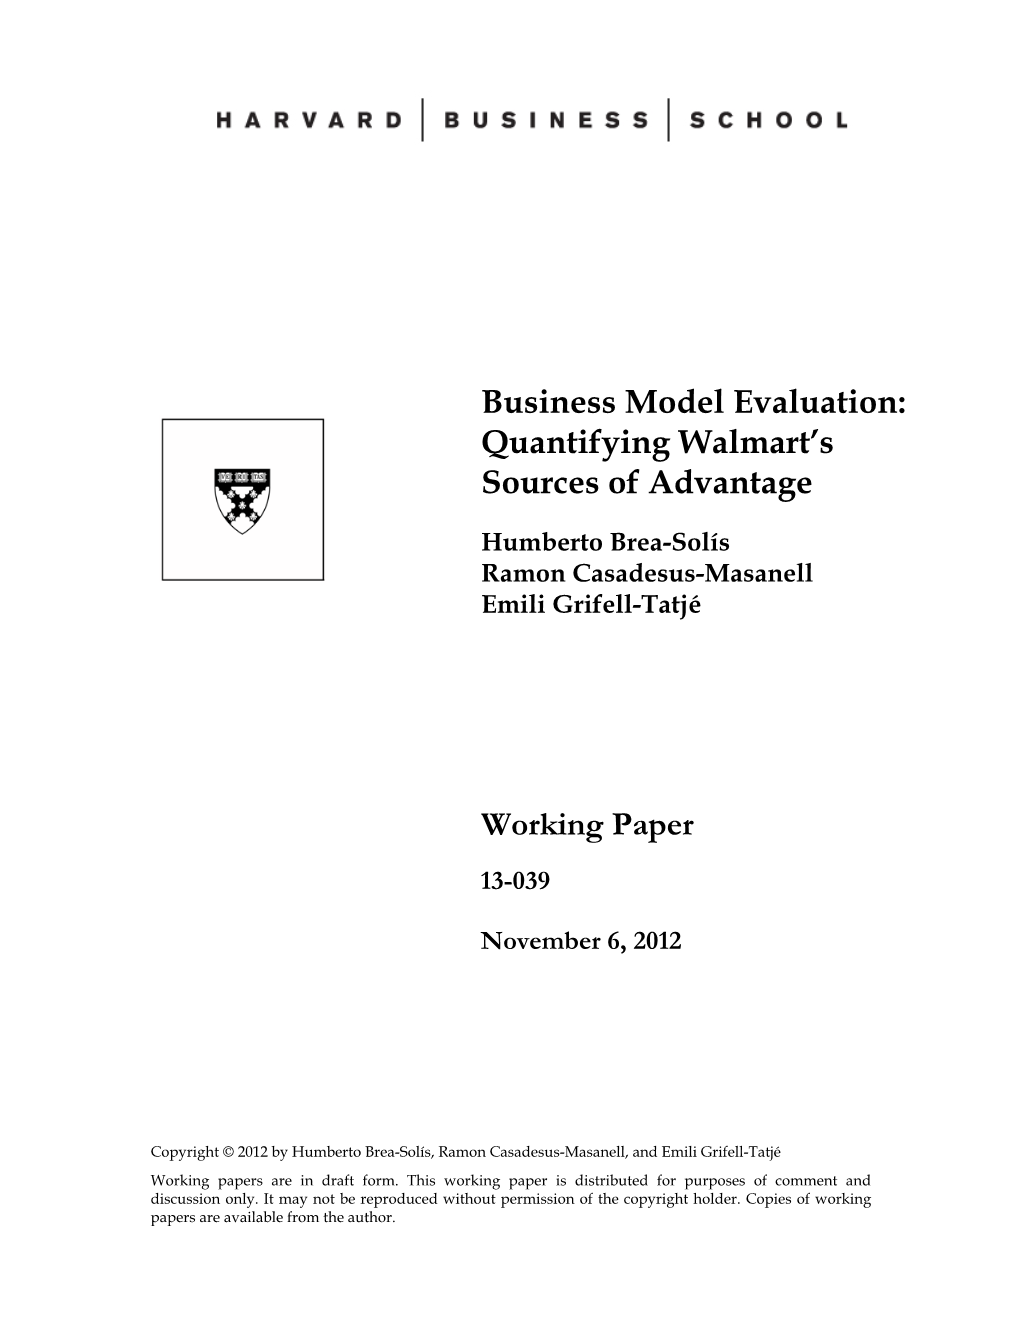 Business Model Evaluation: Quantifying Walmart's Sources Of